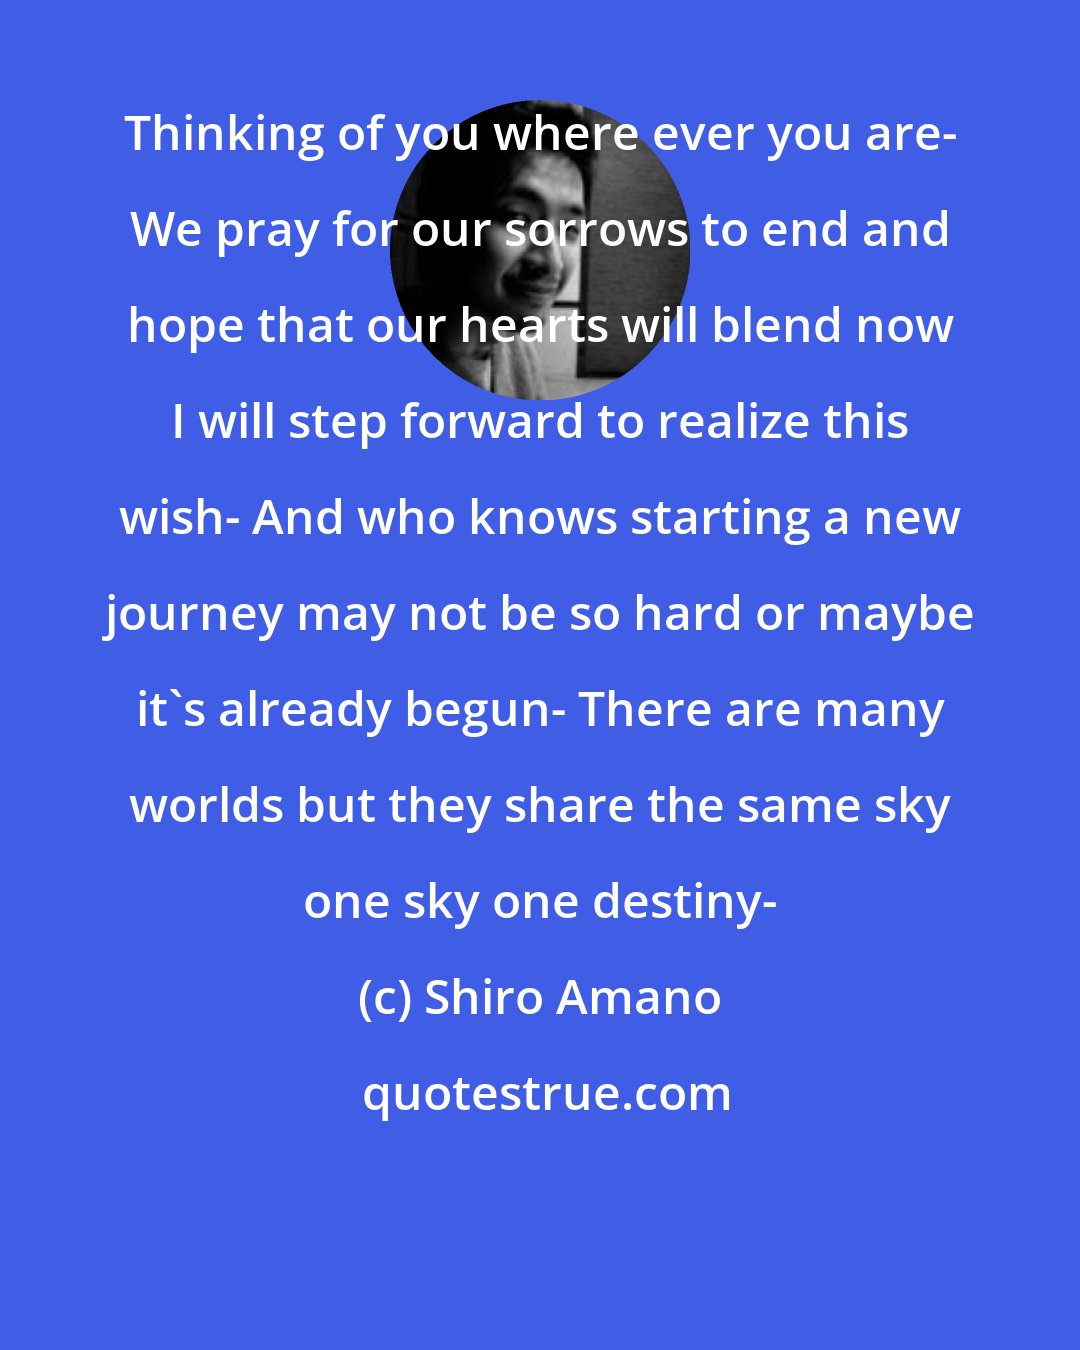 Shiro Amano: Thinking of you where ever you are- We pray for our sorrows to end and hope that our hearts will blend now I will step forward to realize this wish- And who knows starting a new journey may not be so hard or maybe it's already begun- There are many worlds but they share the same sky one sky one destiny-